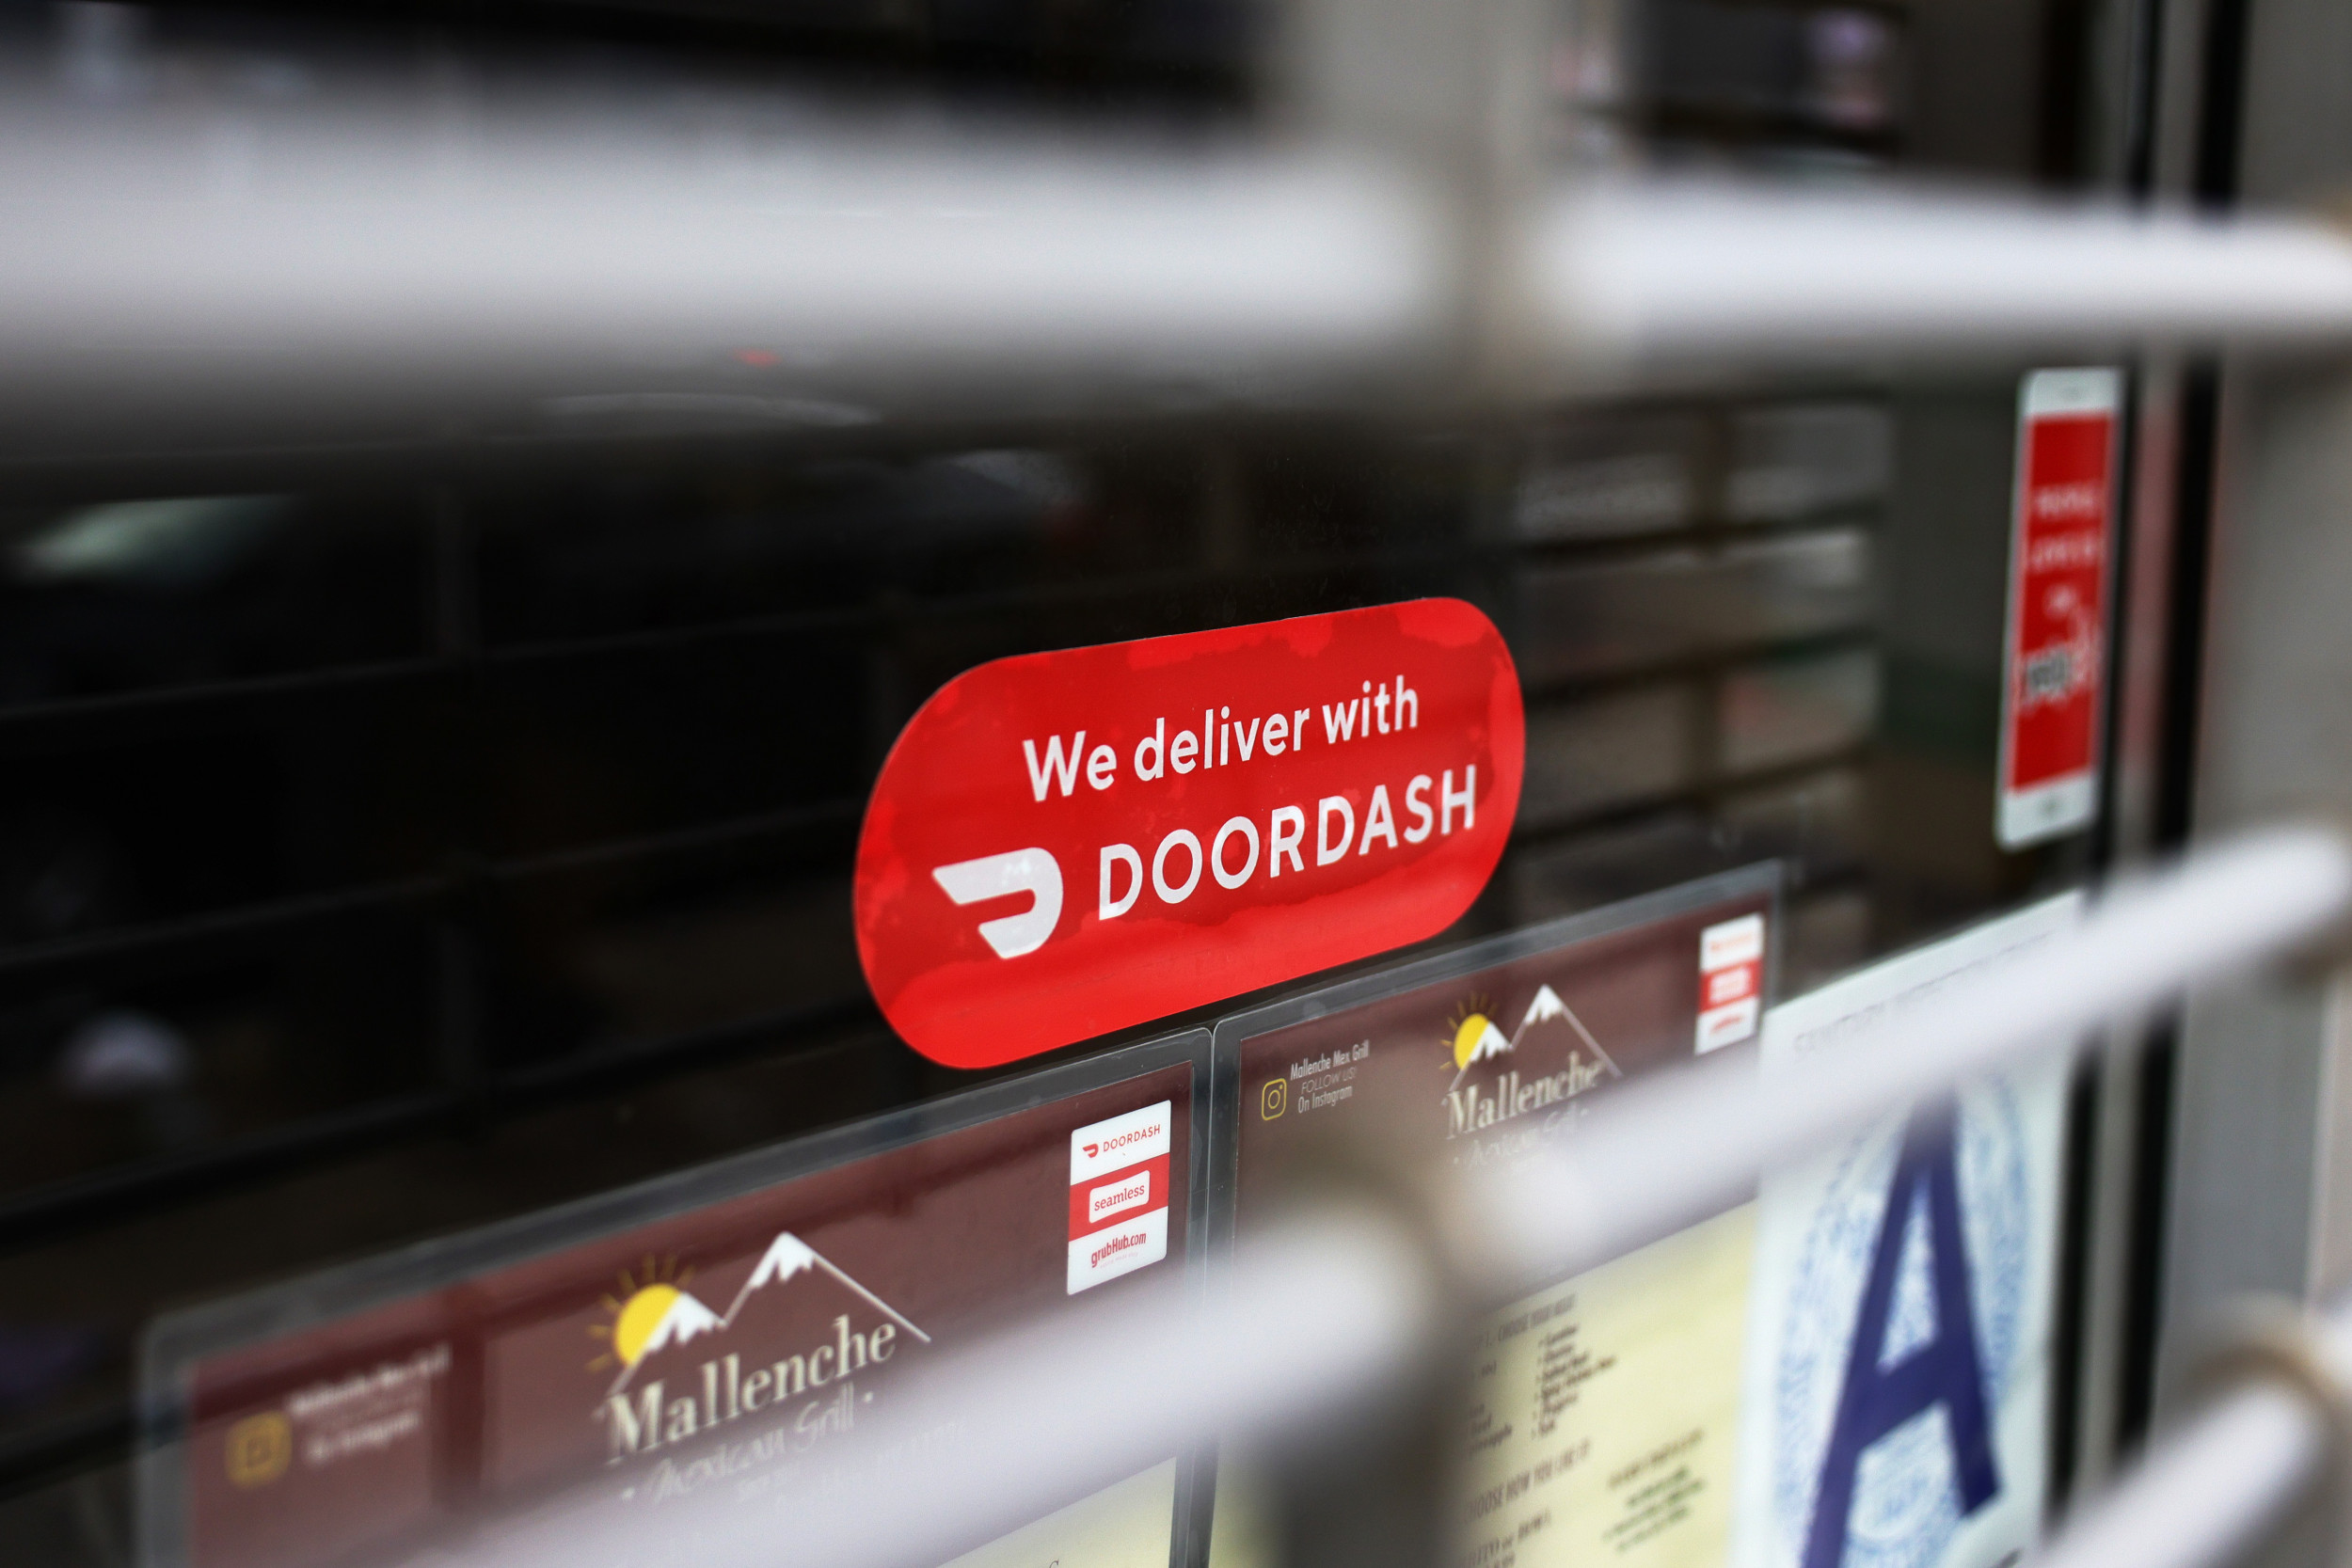 DoorDash requires all employees to make deliveries